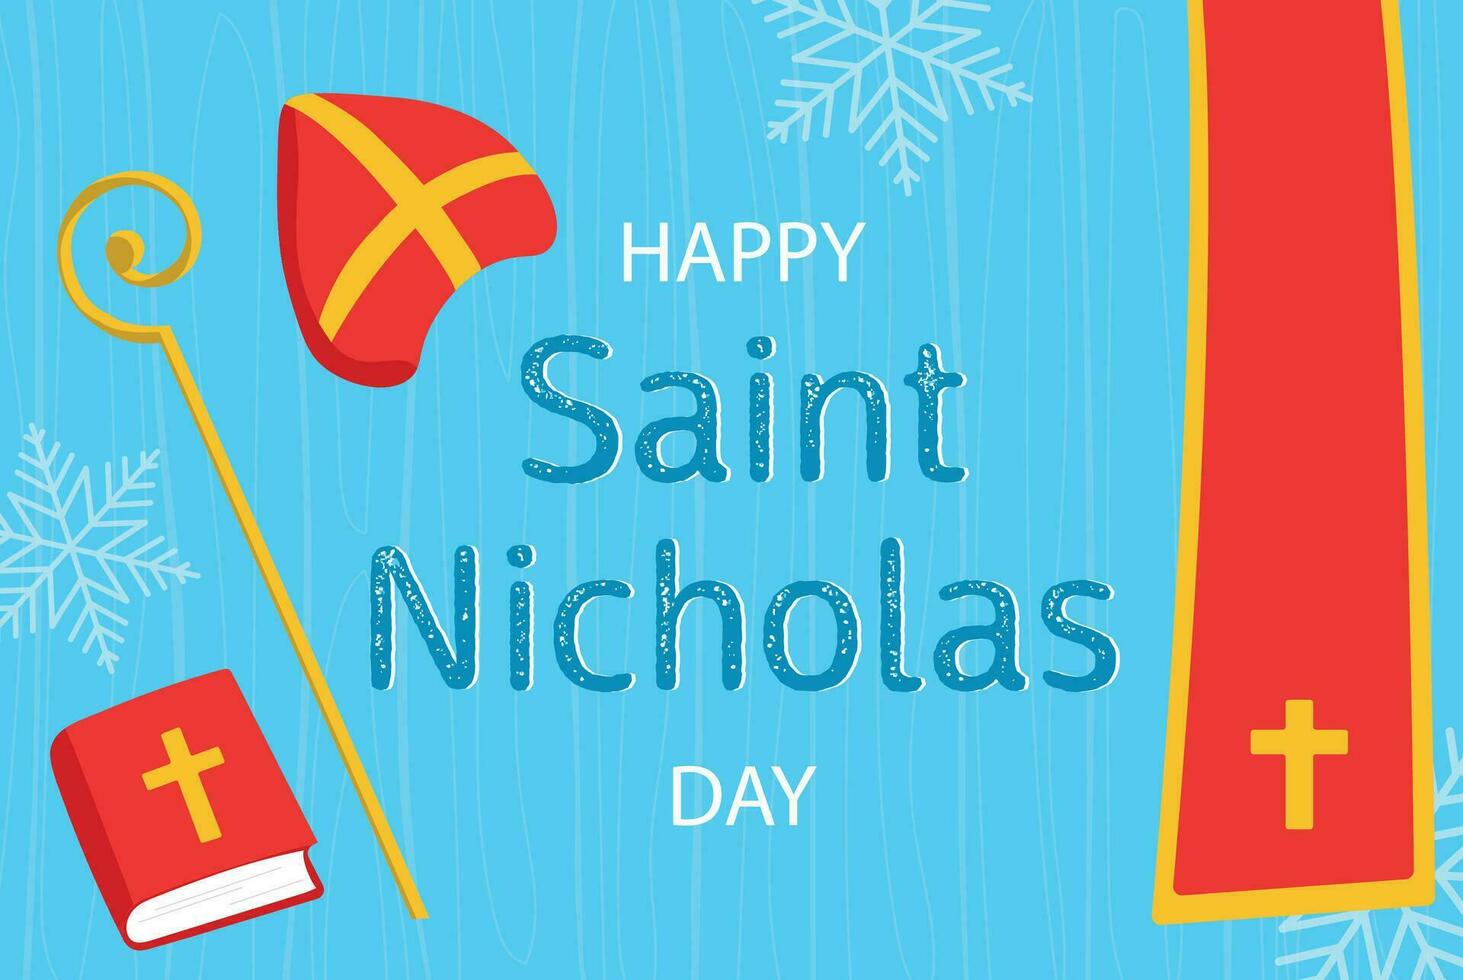 Saint Nicholas Day. Horizontal banner with attributes of Saint Nicholas, hat, bible, candy, staff. Traditional holidays of Christian countries. Sinterklaas day vector